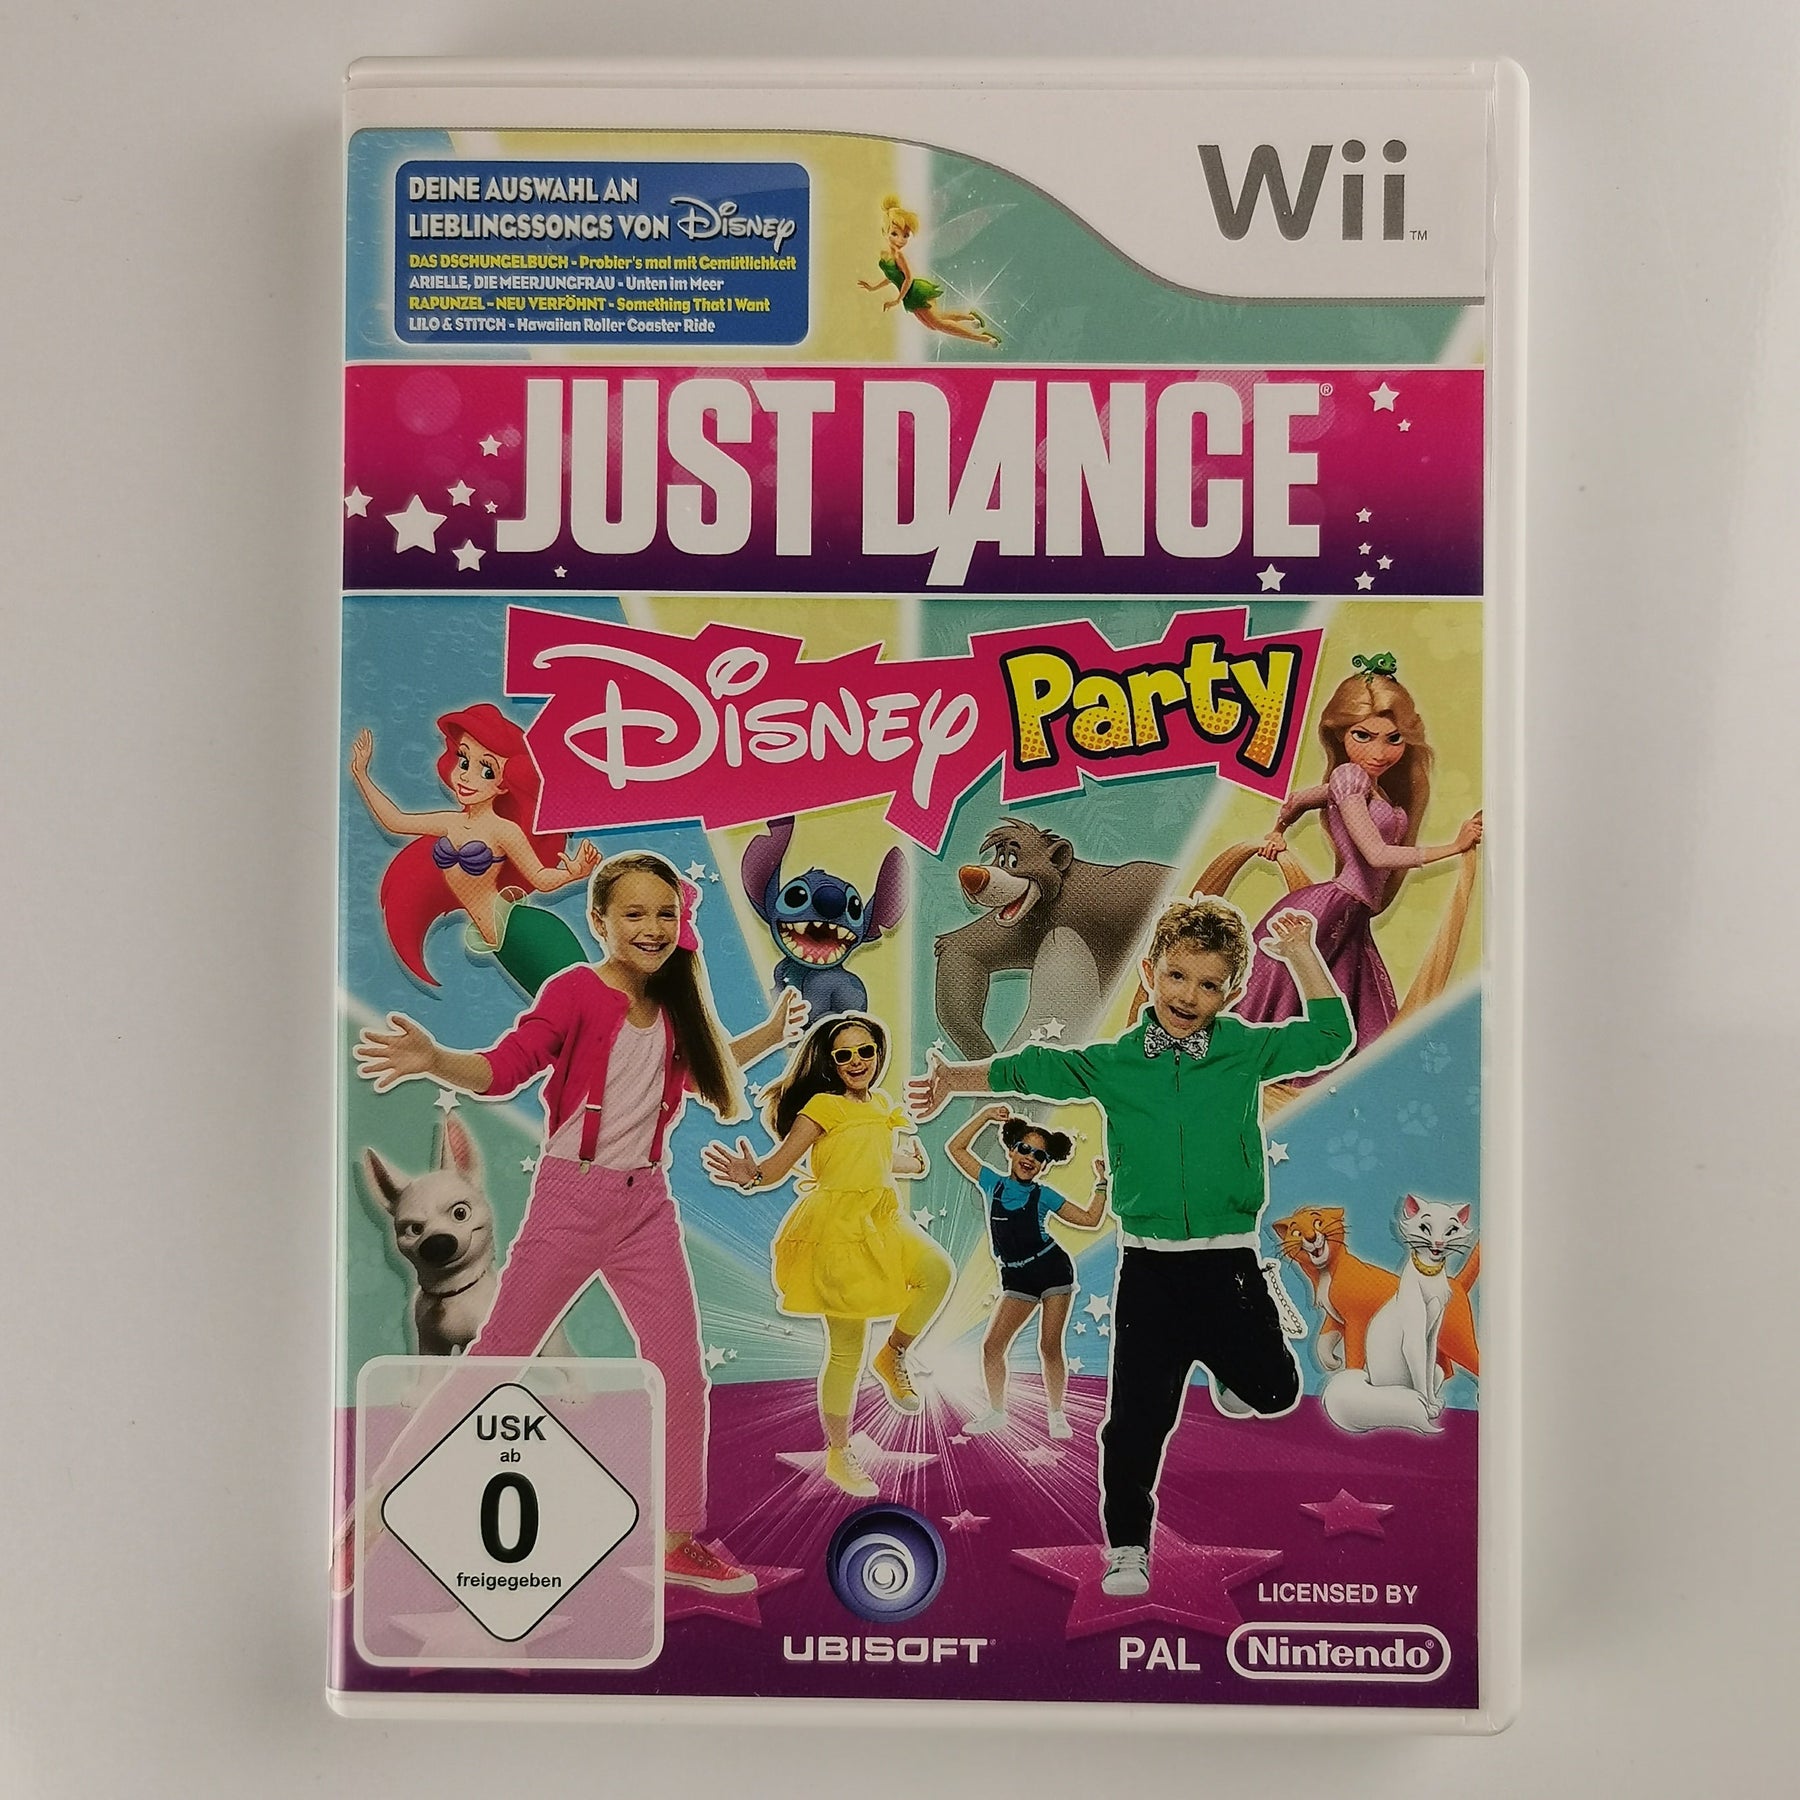 Just Dance Disney Party [Wii]